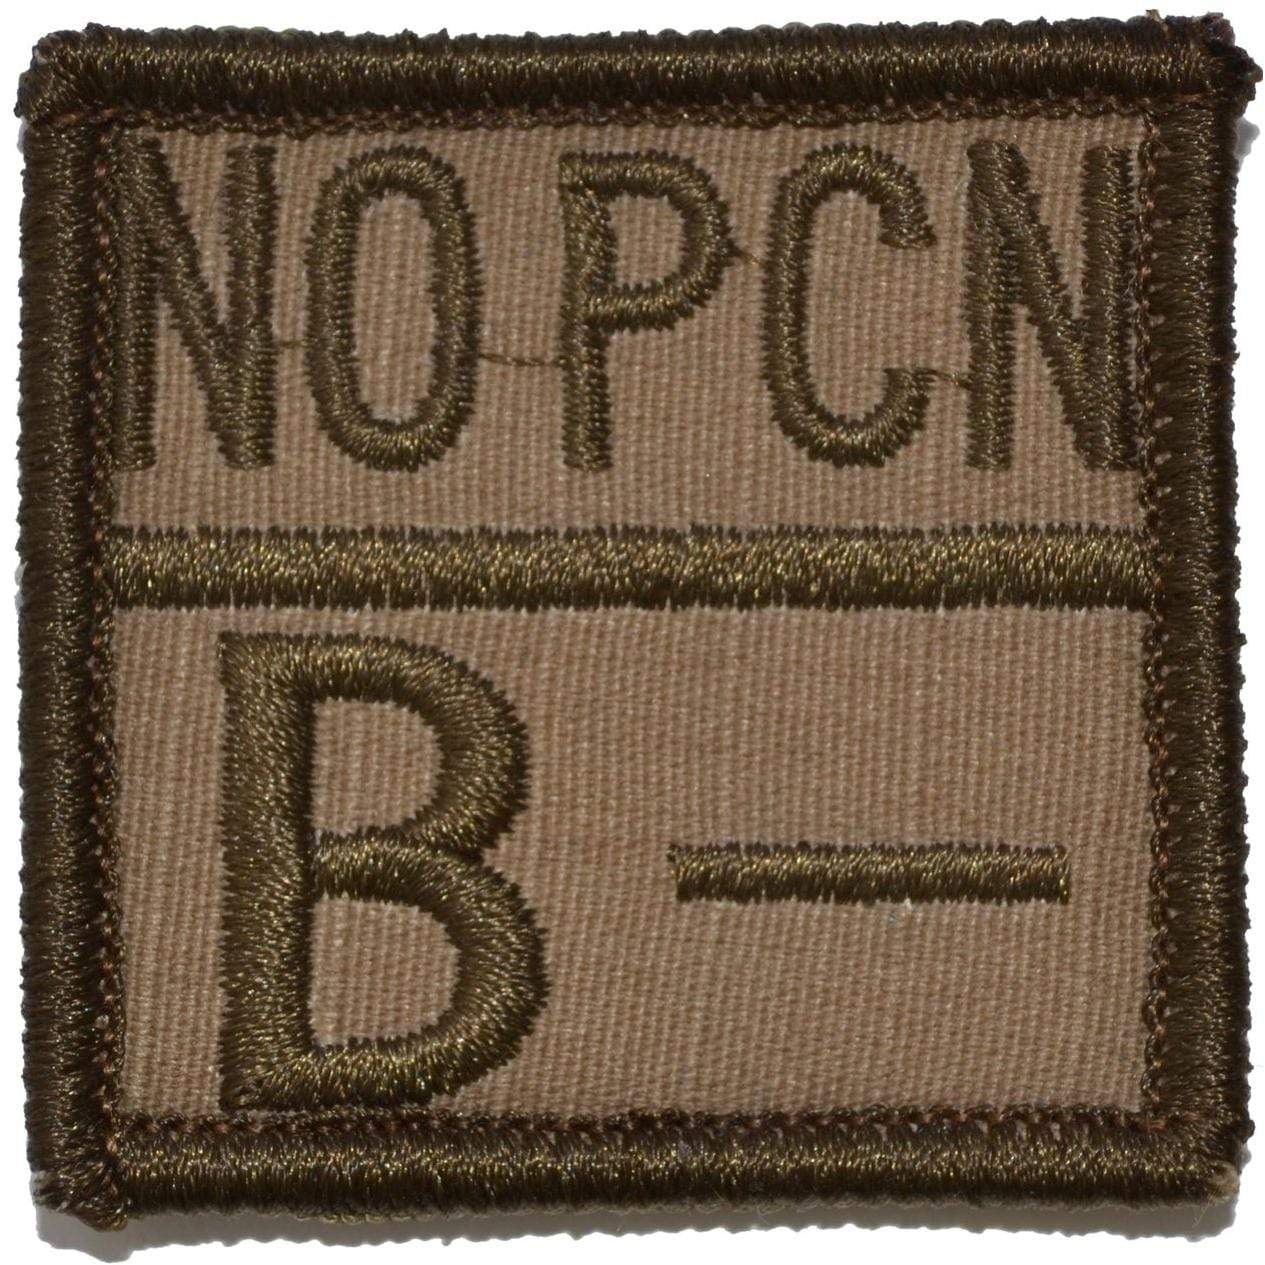 Bloody Knuckles Brotherhood PATCH velcro-backed, 2-5/8 - Badges-Etc